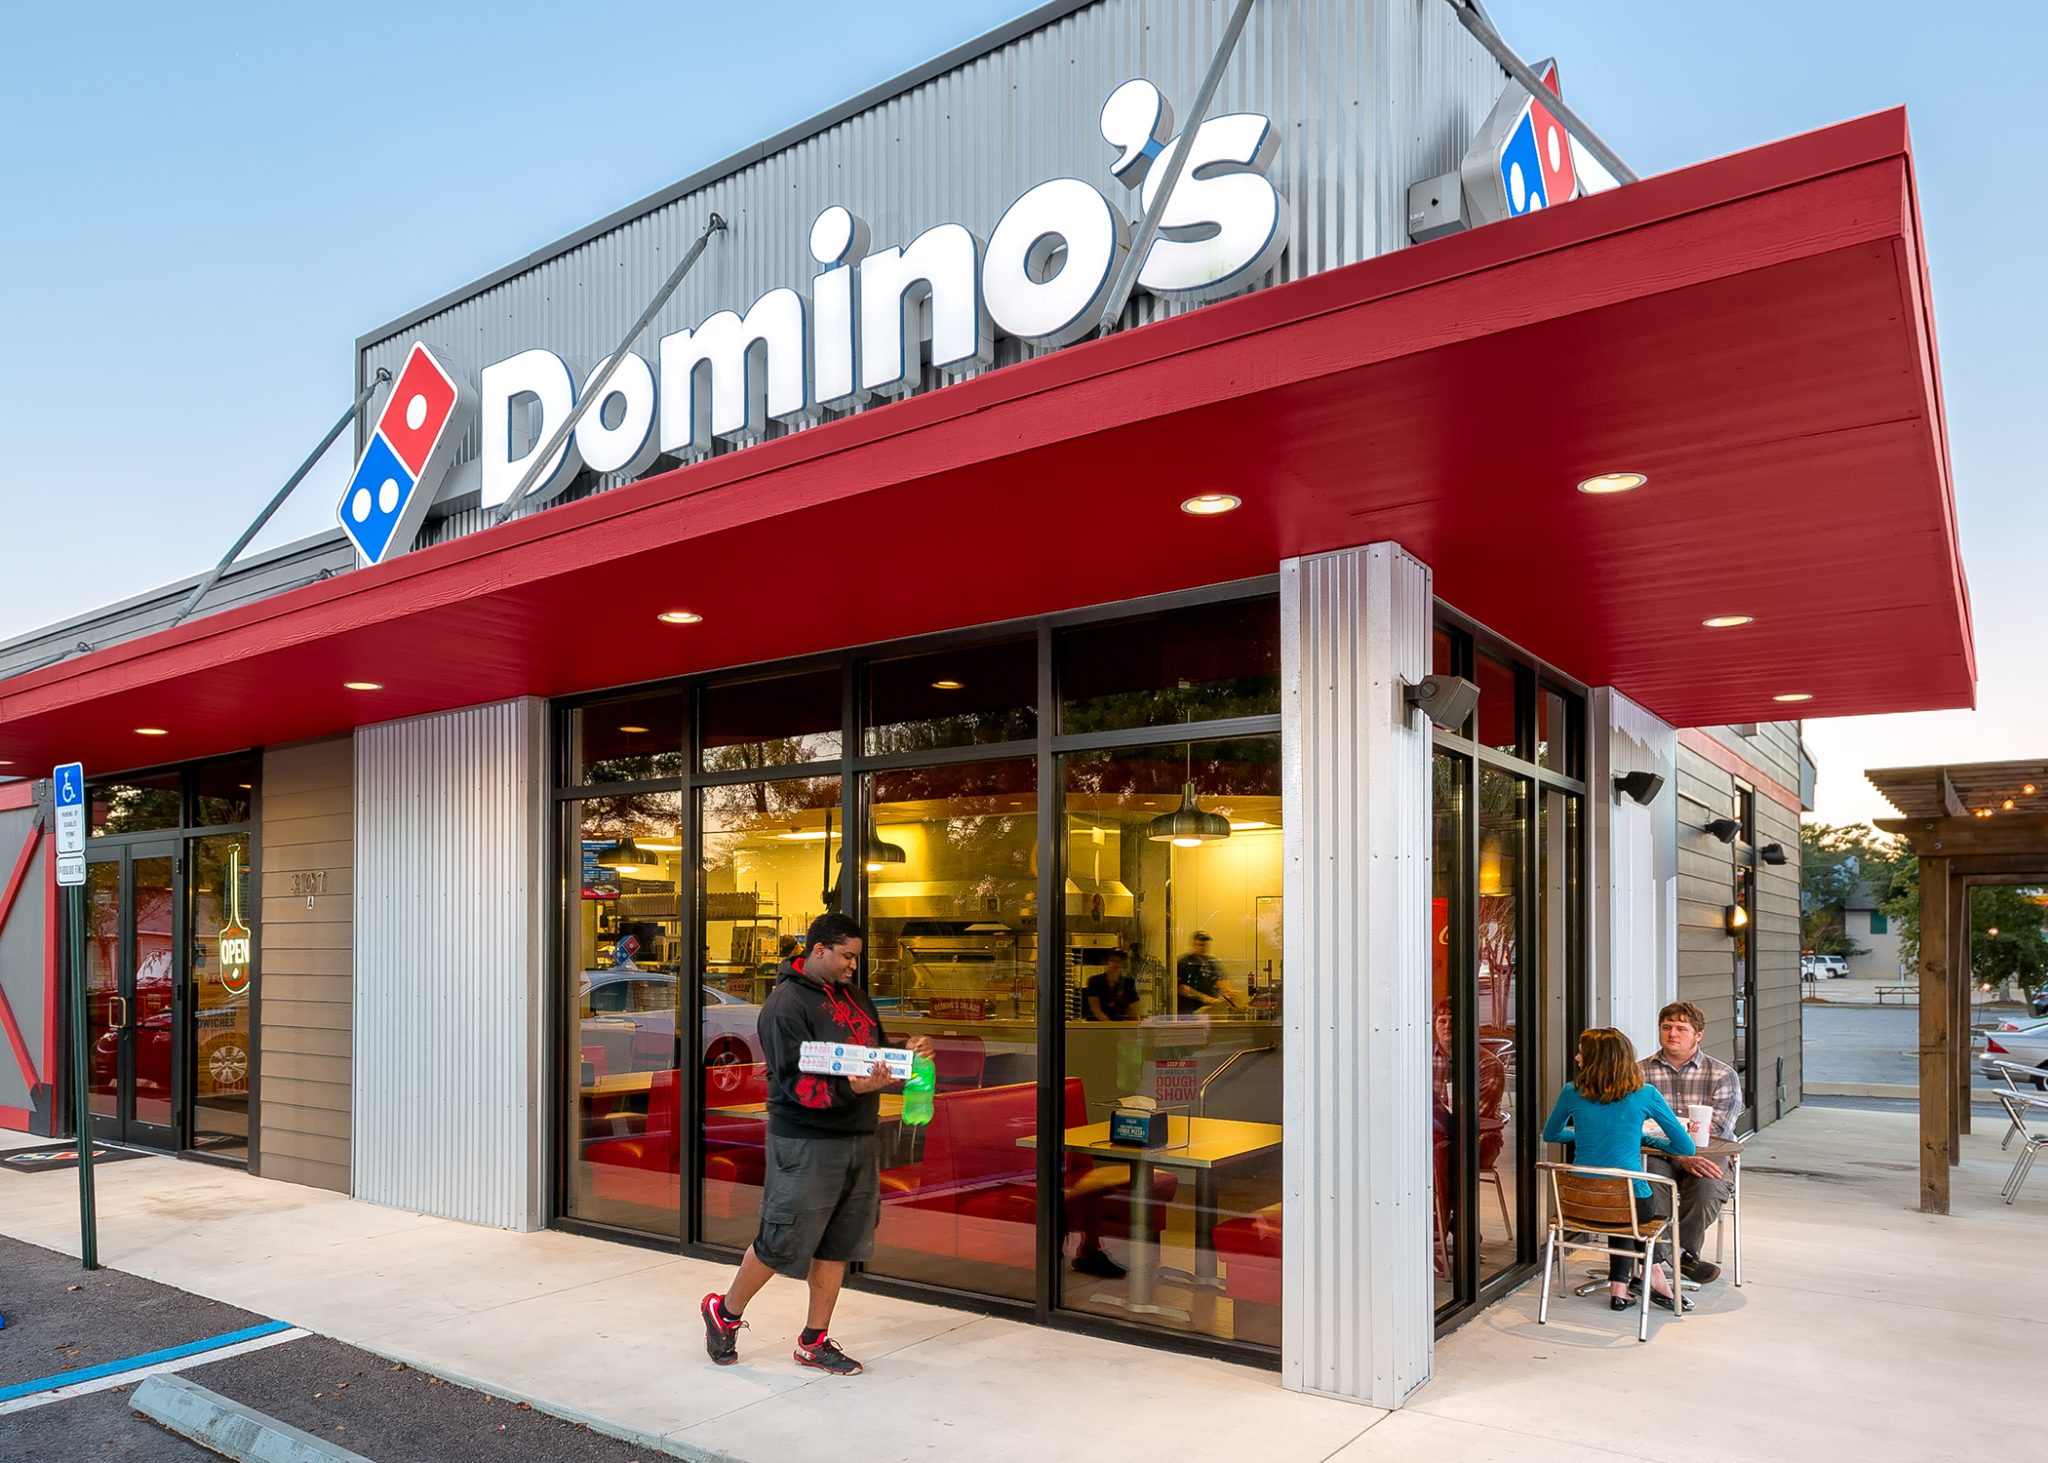 Domino's - Top 10 fast food restaurants in the world